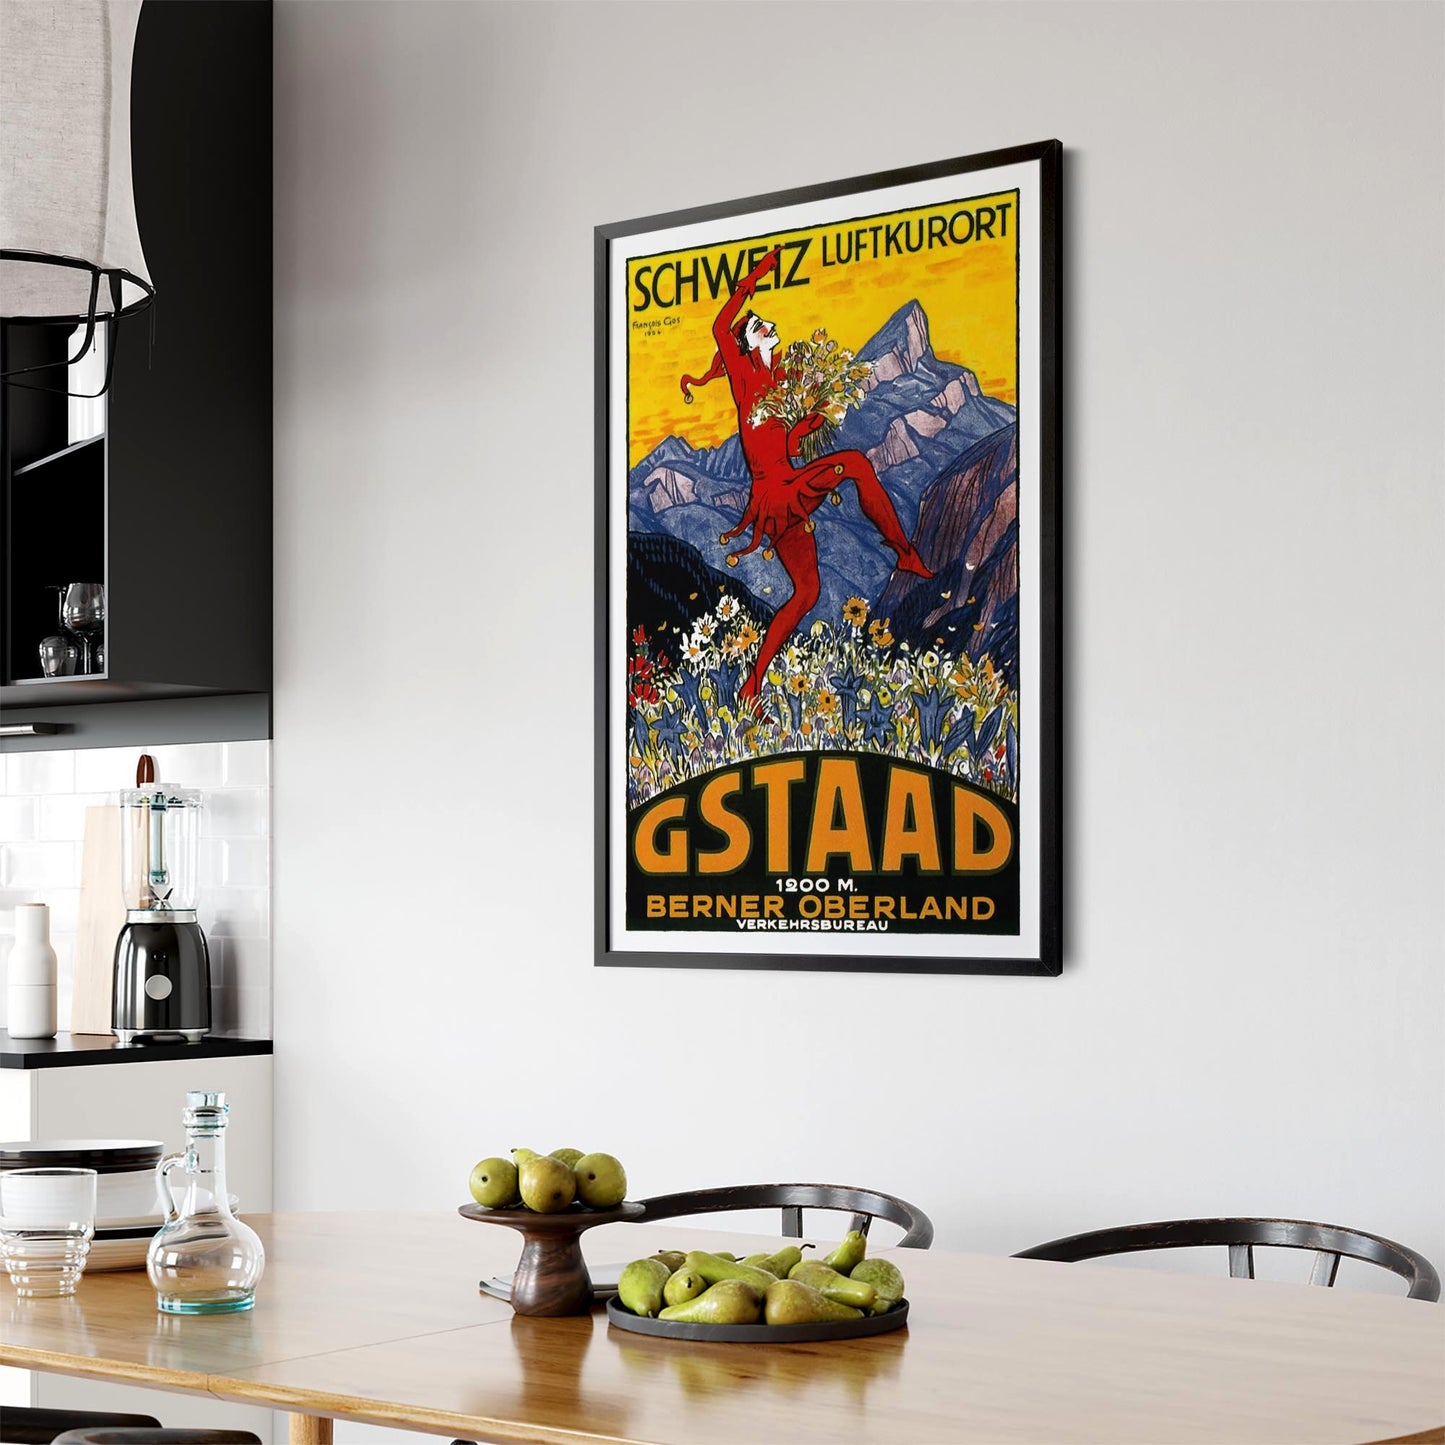 Gstaad, Switzerland Vintage Advert Wall Art - The Affordable Art Company